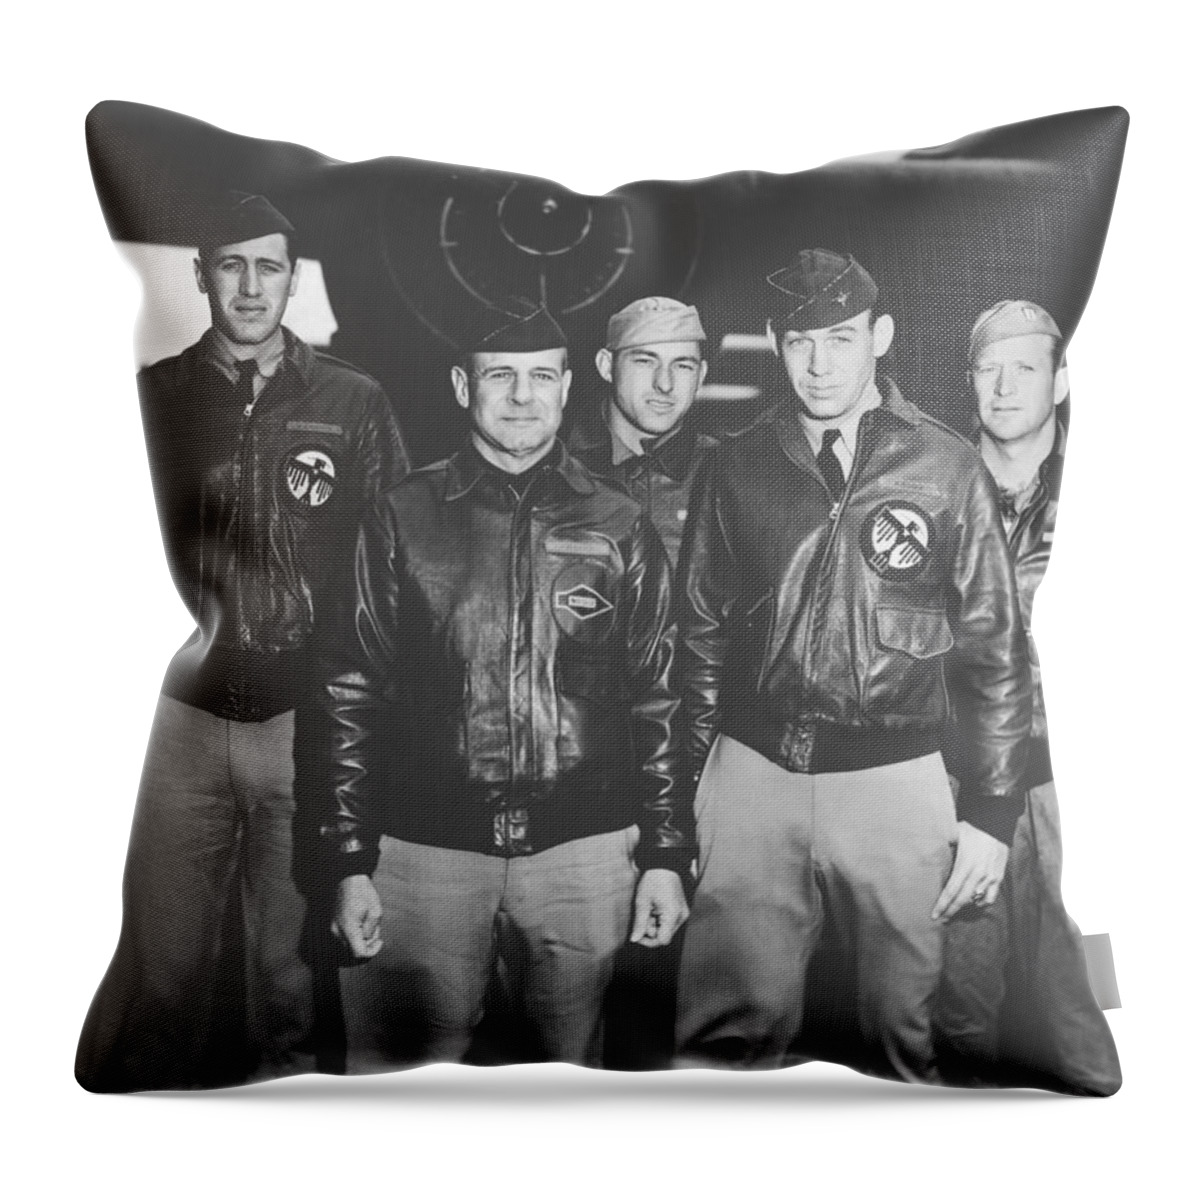 Doolittle Raid Throw Pillow featuring the photograph Jimmy Doolittle and His Crew by War Is Hell Store